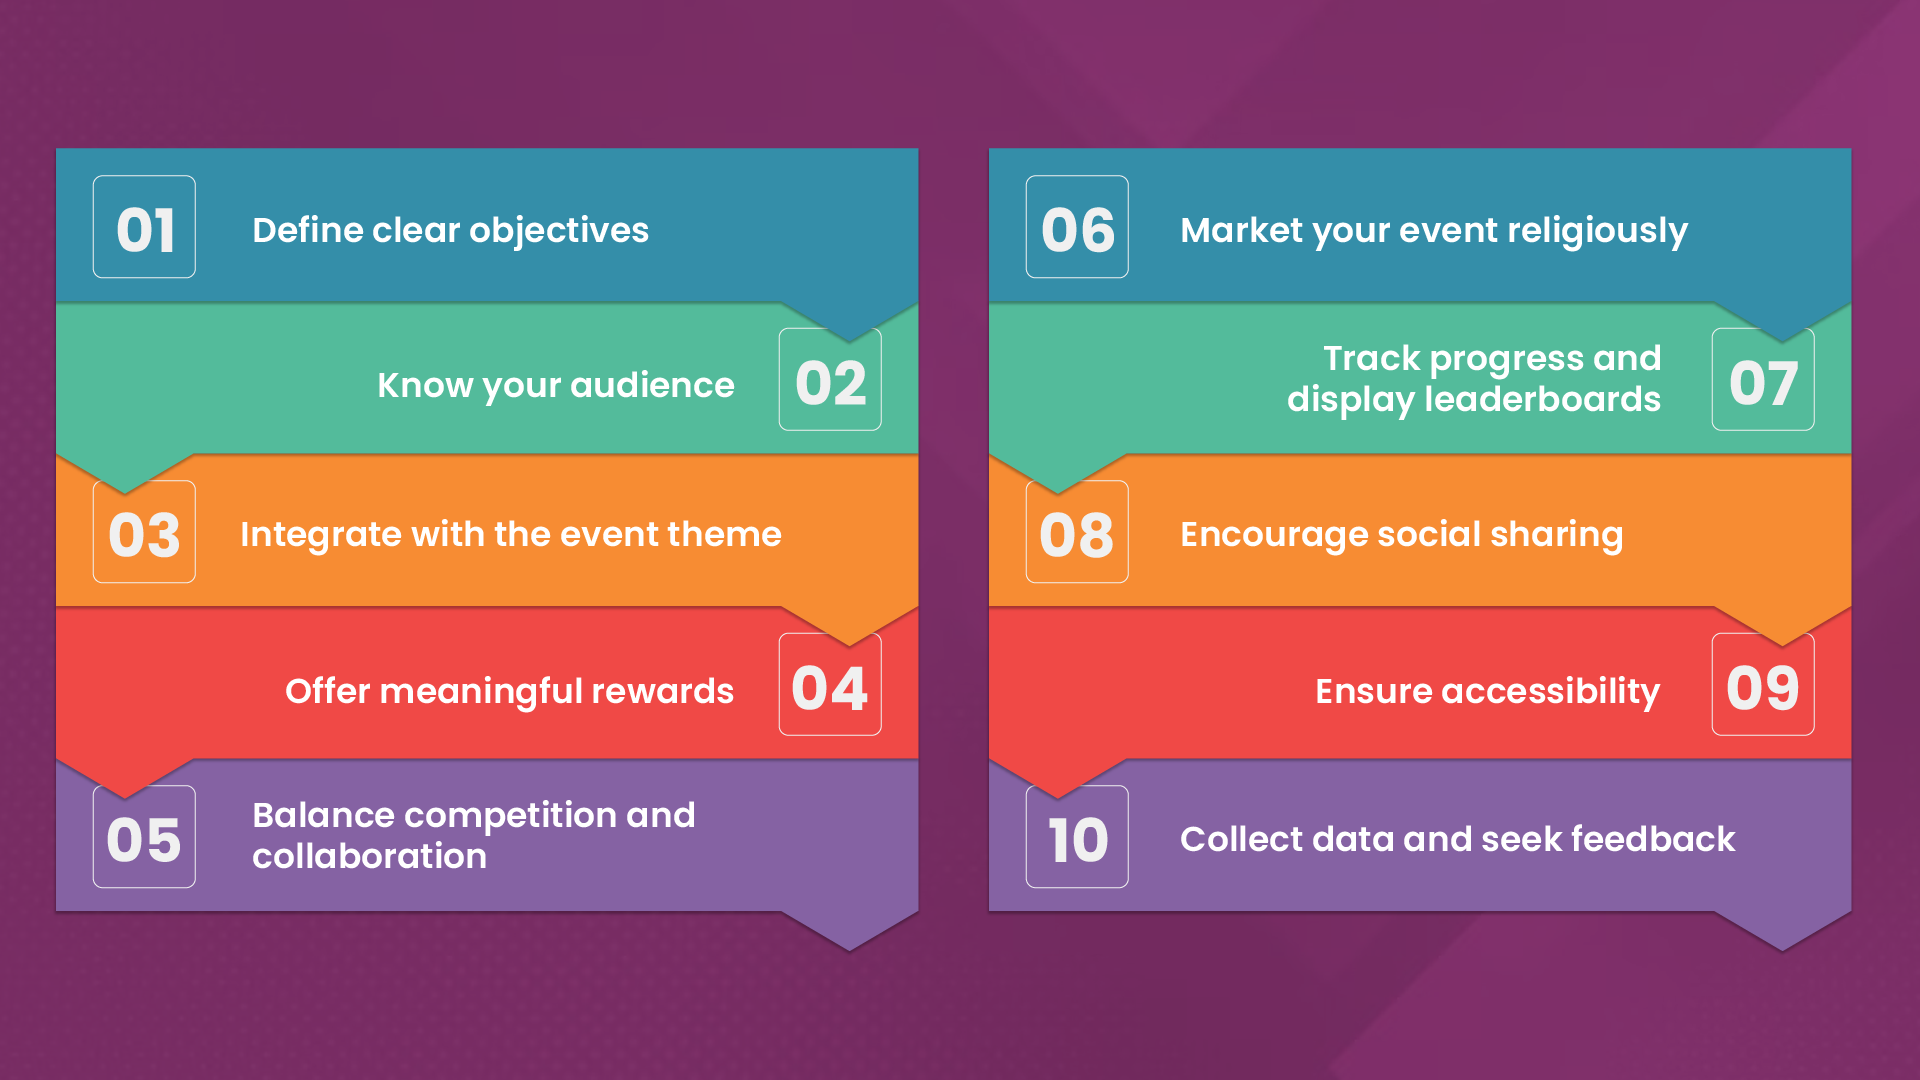 10 ways to effectively gamify an event